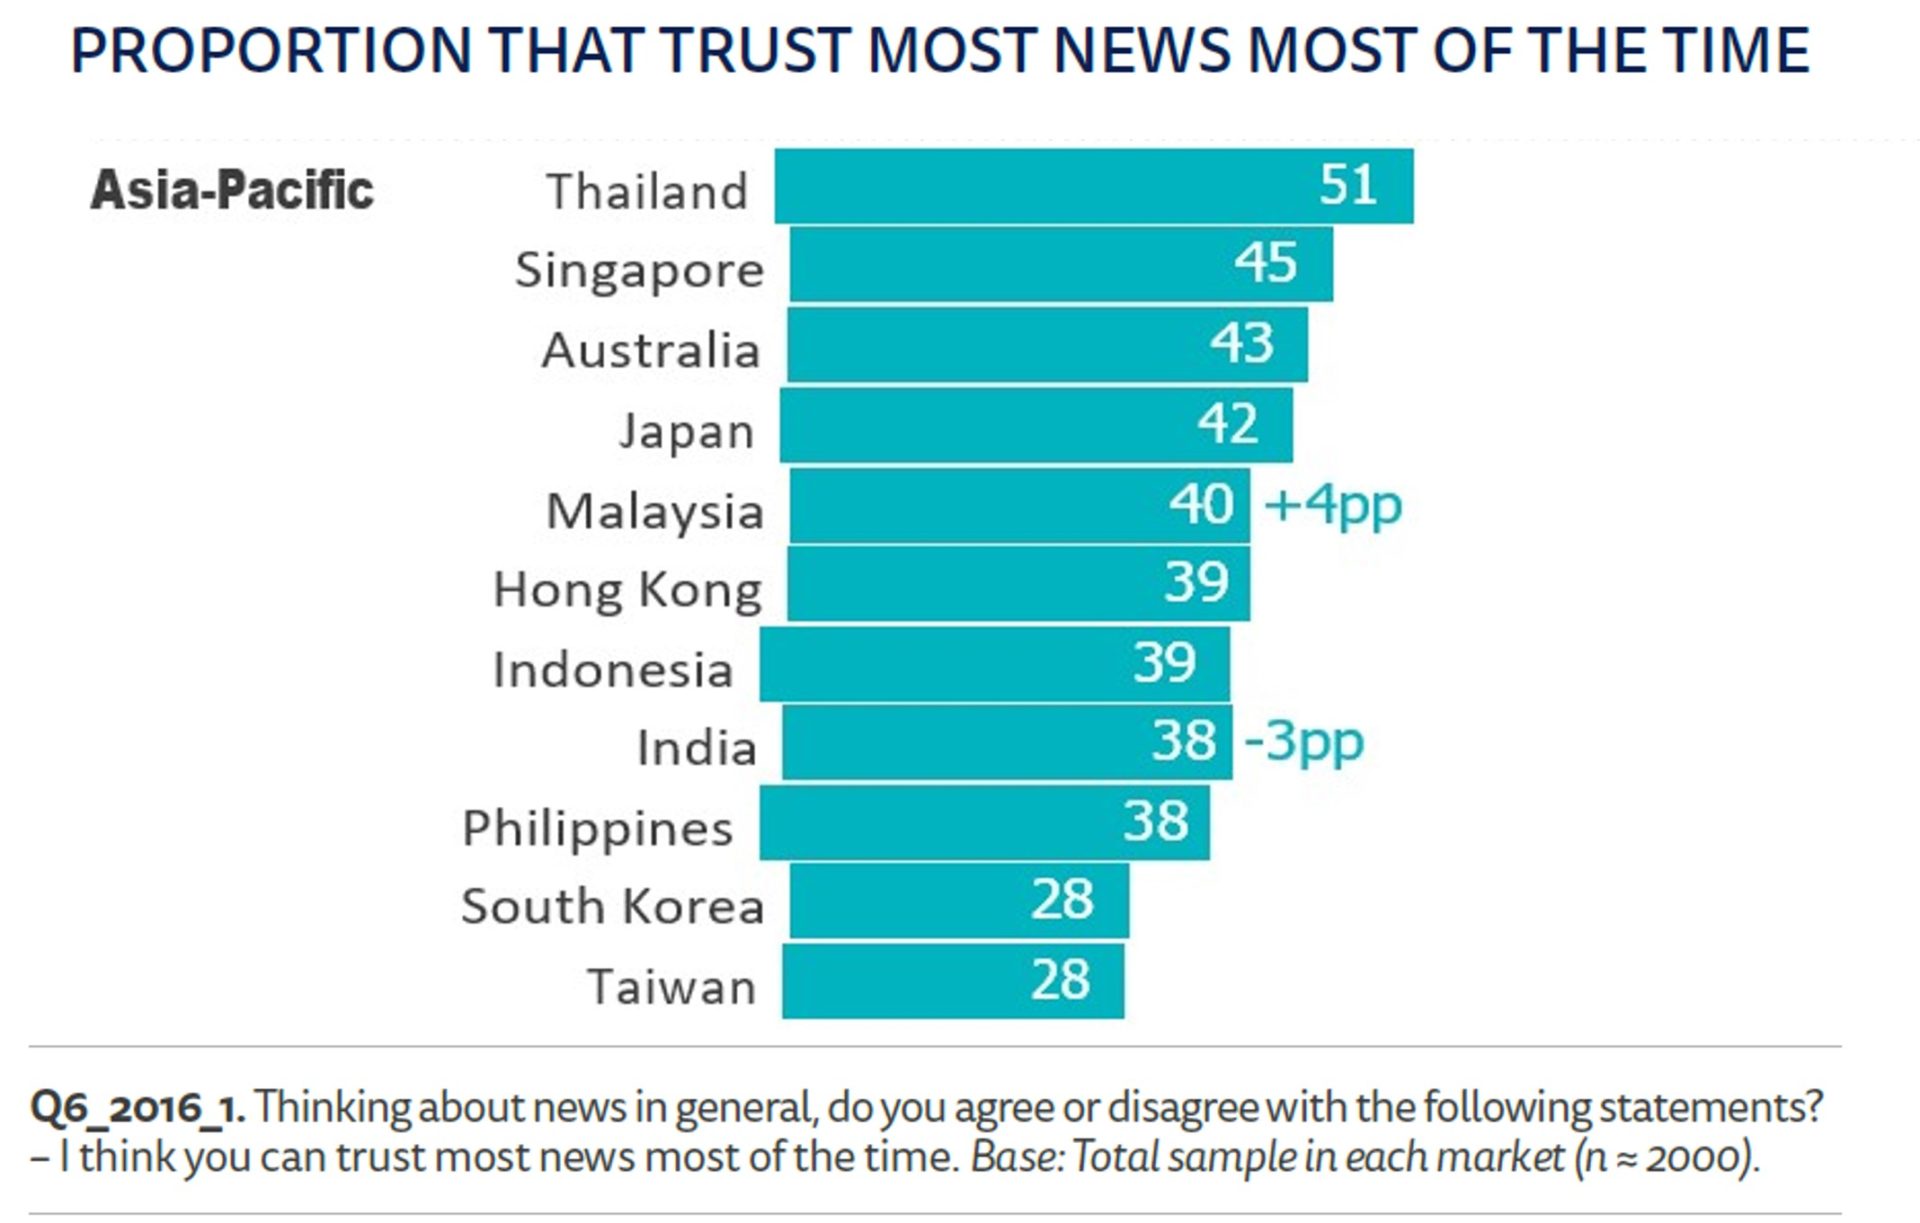 Proportion that trust most news most of the time